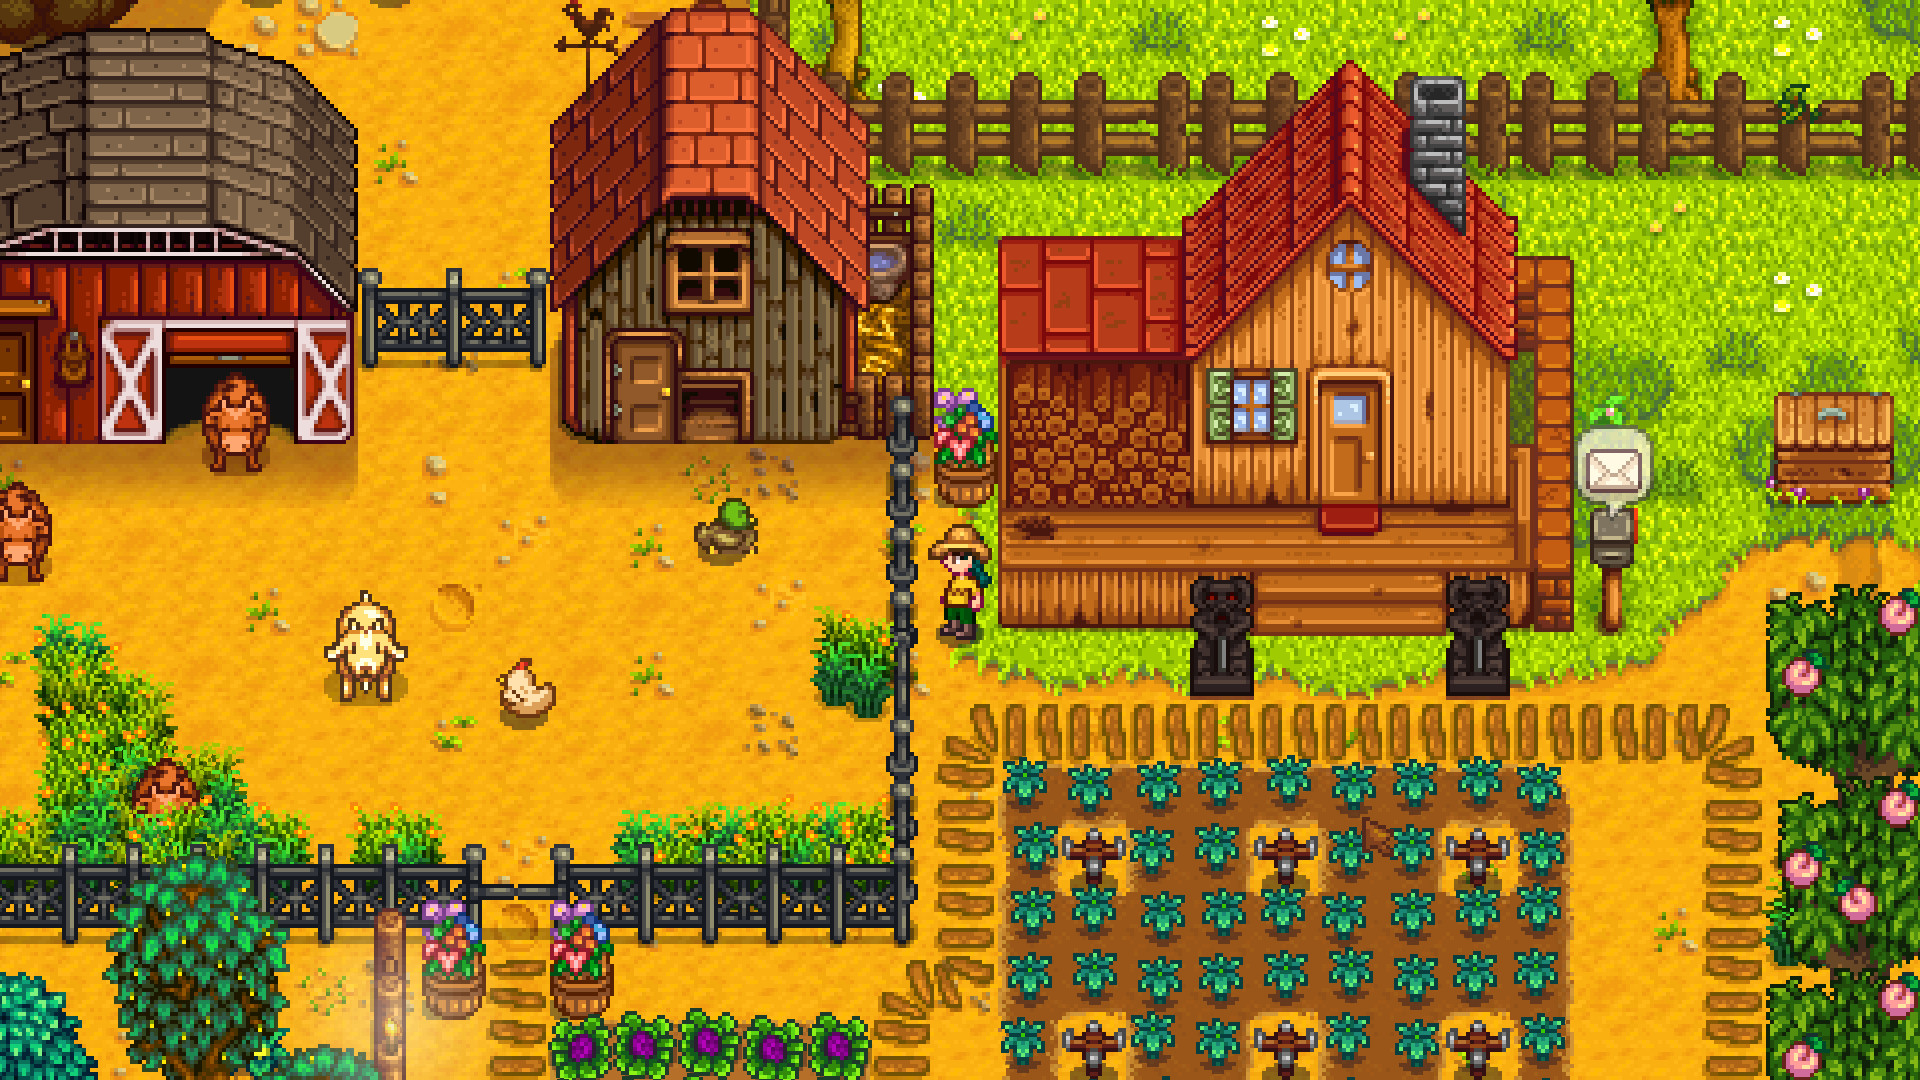 Stardew Valley Celebrates 8th Anniversary with Exciting Update Announcement